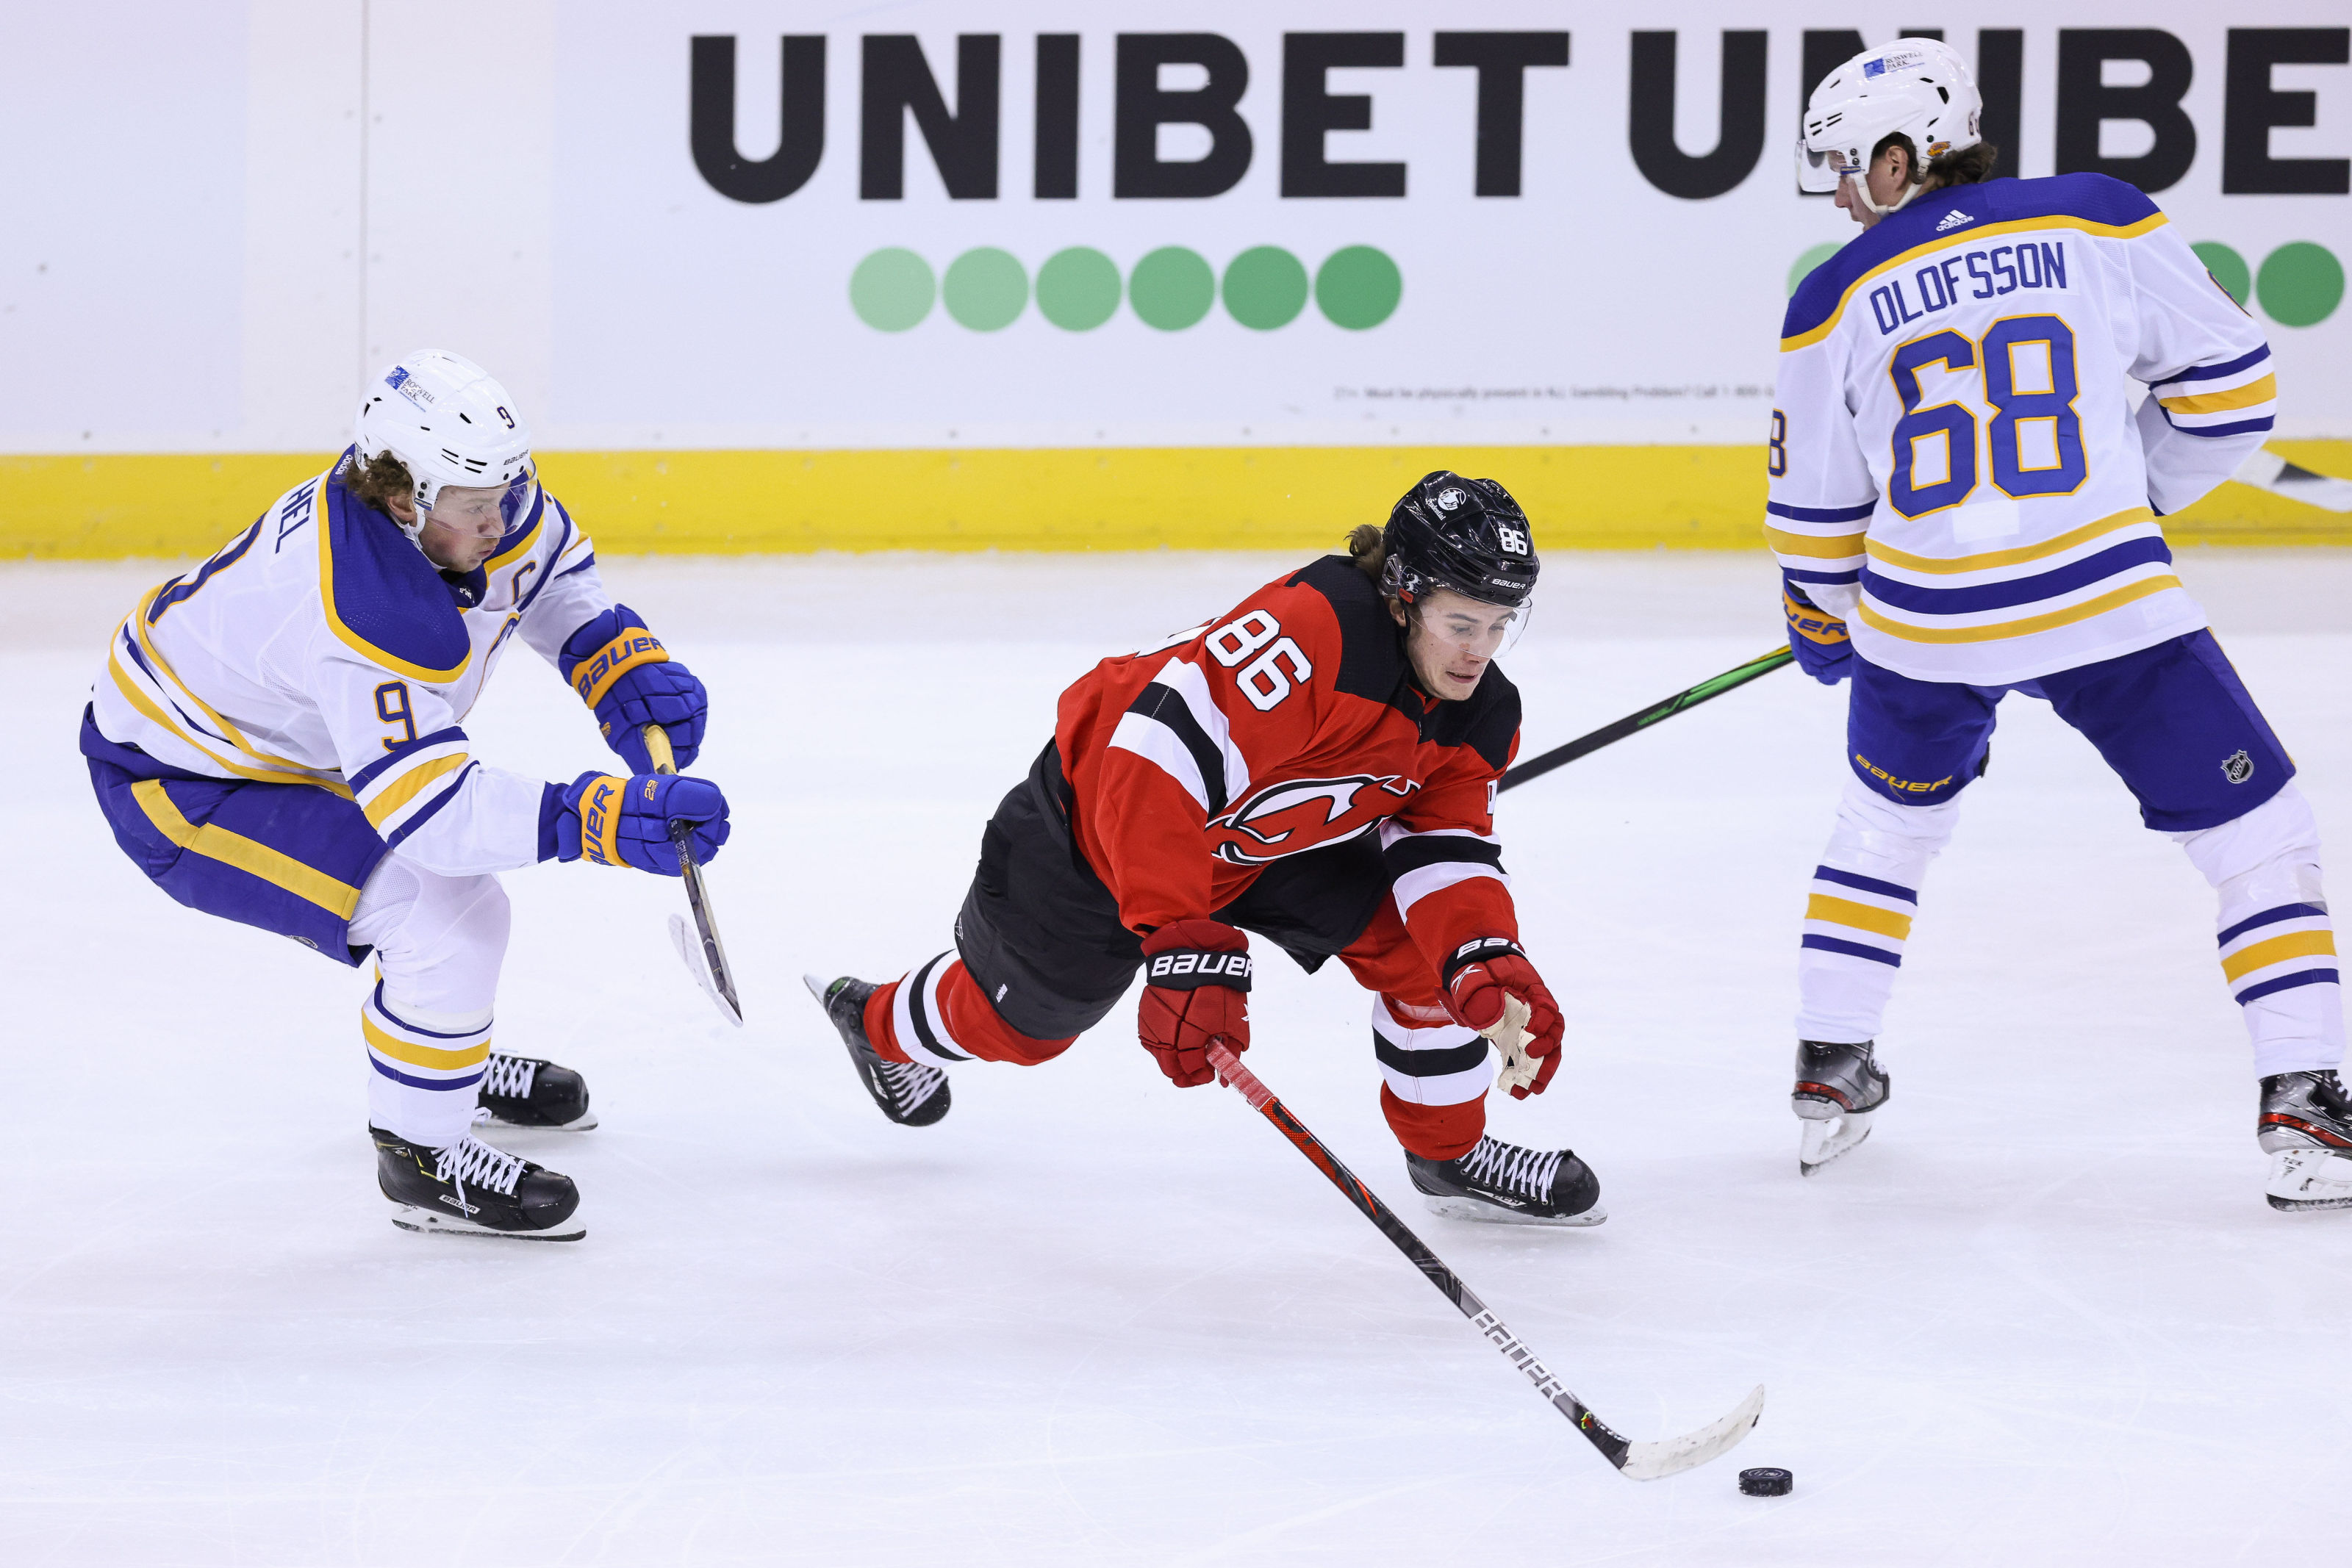 Why Taylor Hall going to the Sabres makes sense for both sides